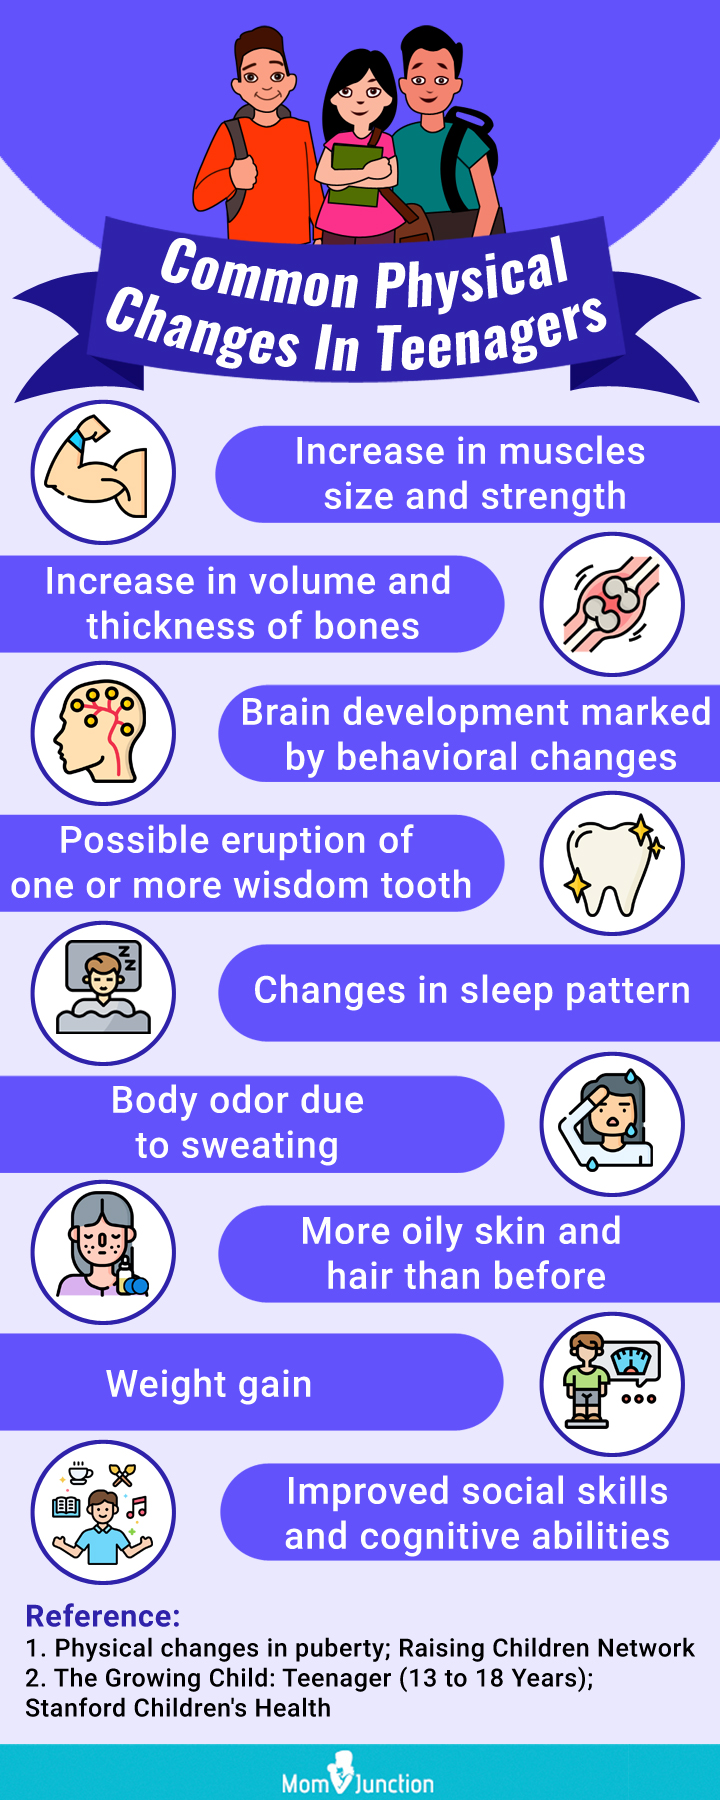 10 physical changes that occur during puberty in boys and girls(infographic)